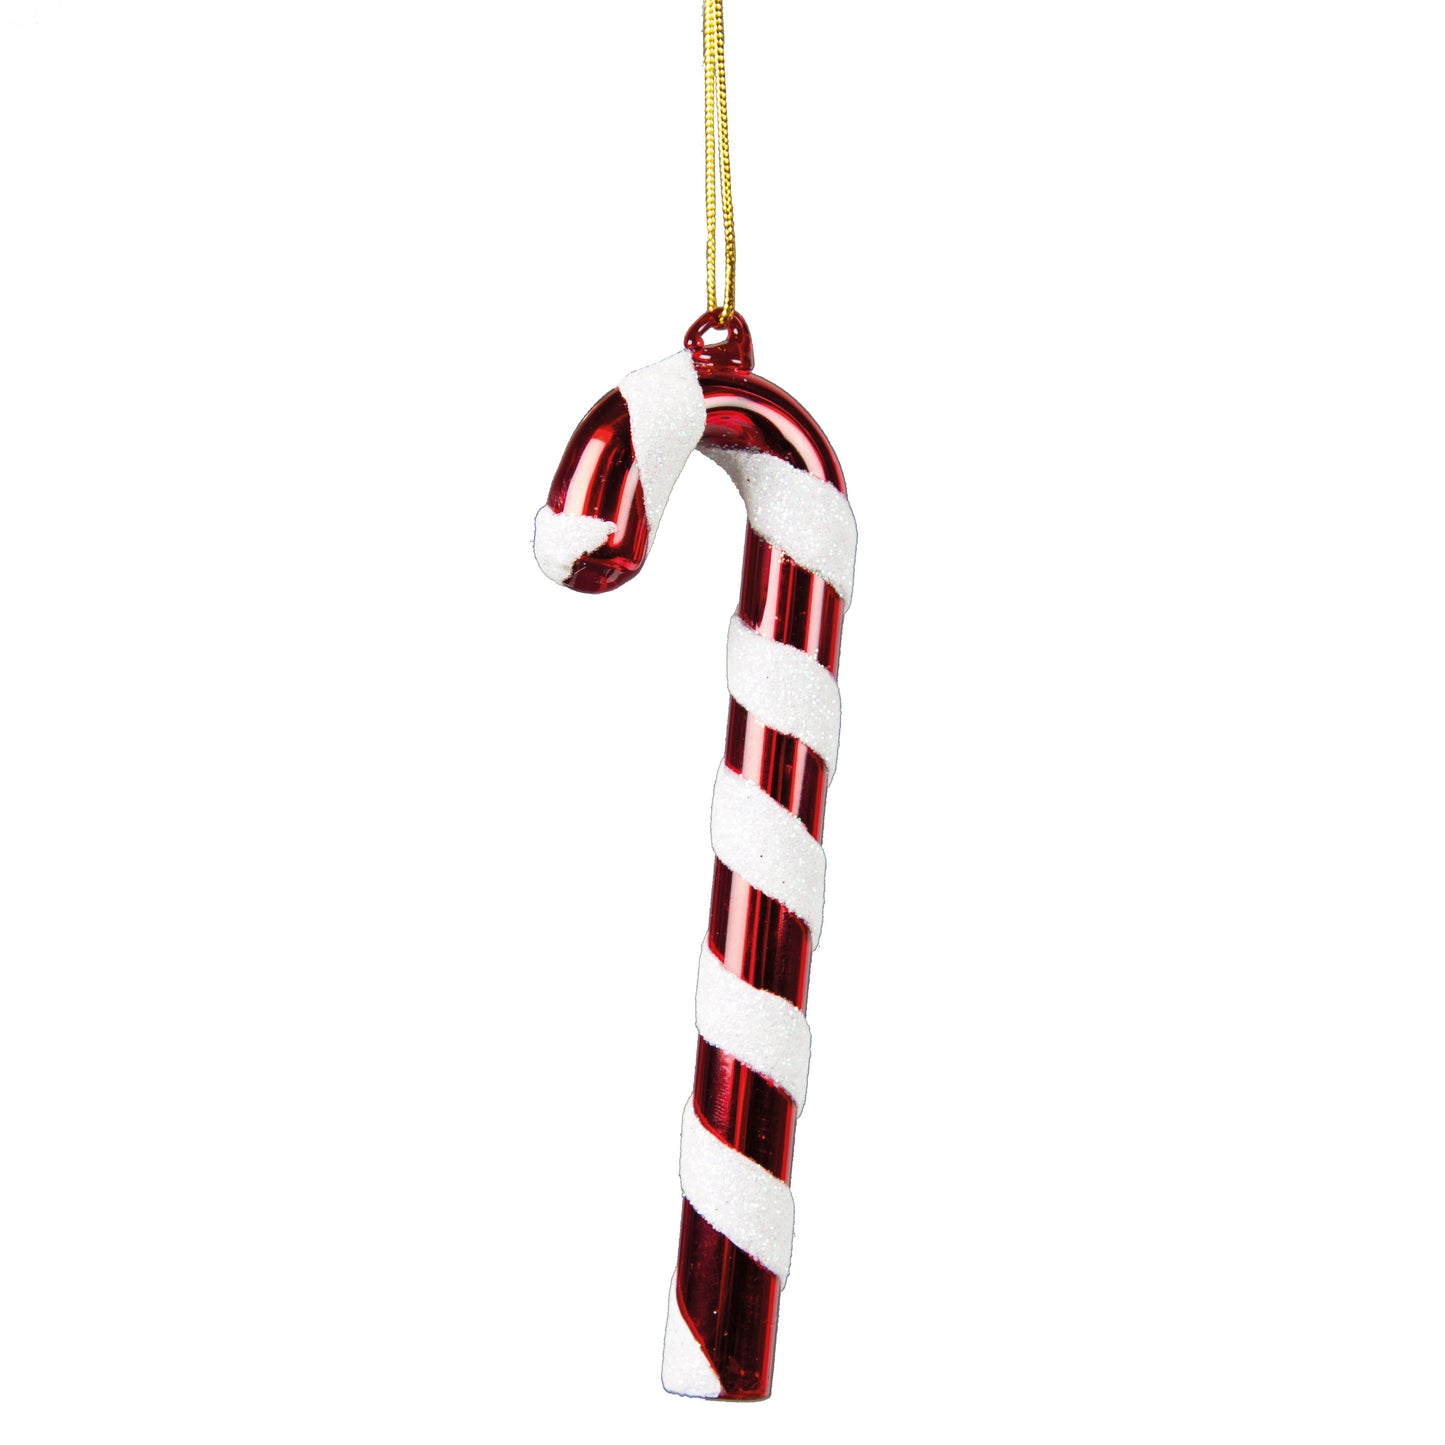 This sparkly red and white candy cane Christmas decoration really does look good enough to eat (please don't)! Candy canes look great spread over the Christmas tree and really do bring that festive touch.